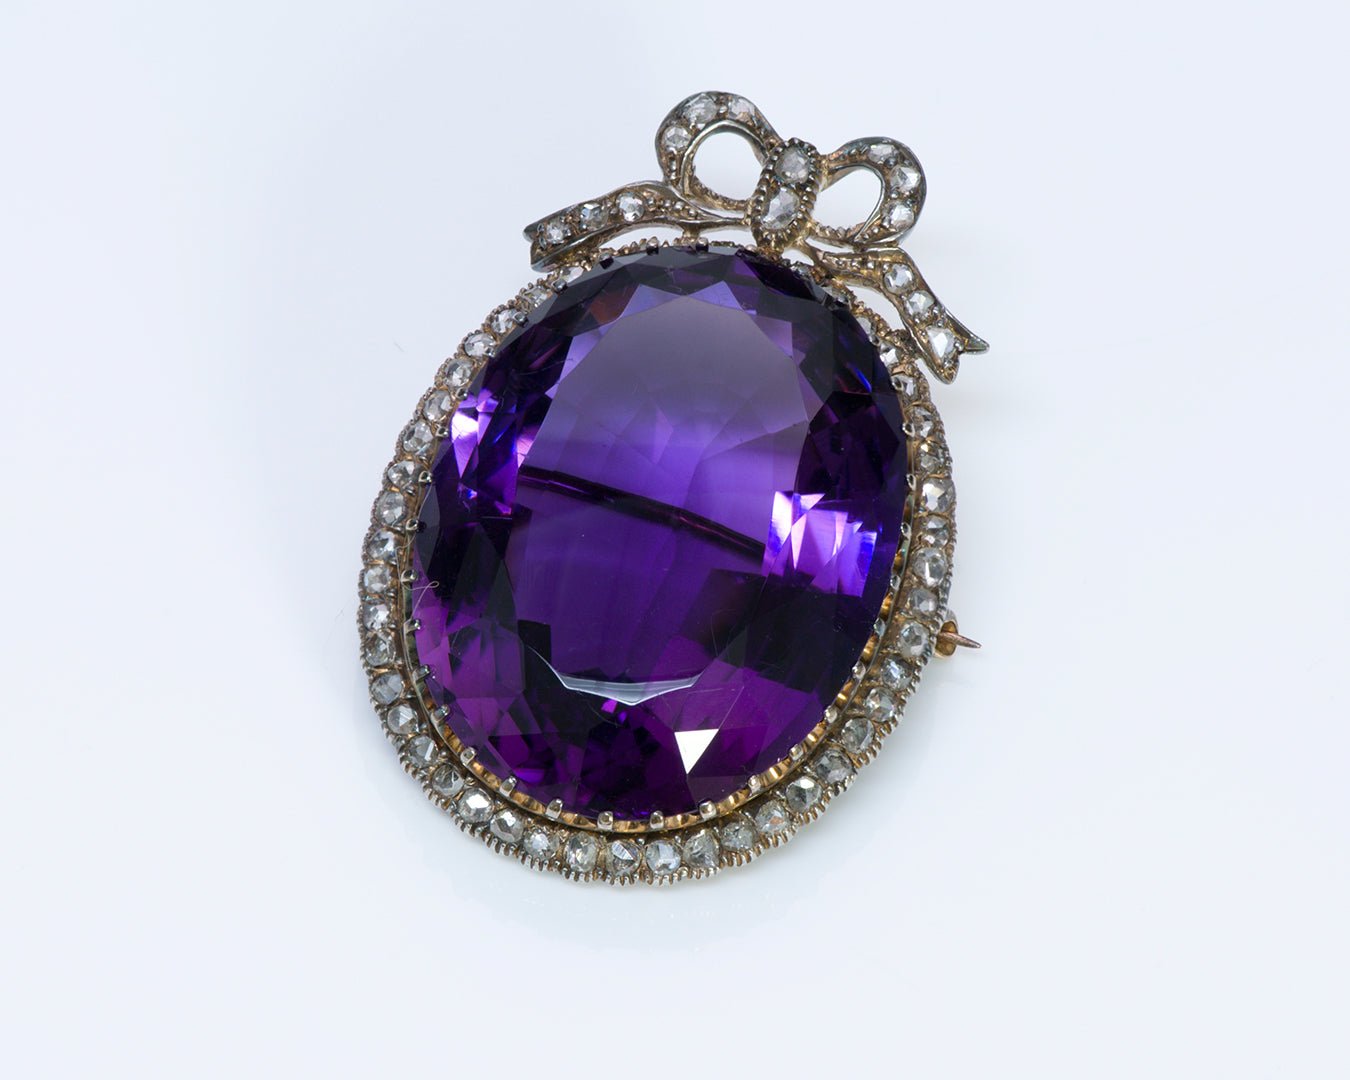 A Stone Prized By Royalties: The Most Famous Crown Amethyst Jewelry - DSF Antique Jewelry